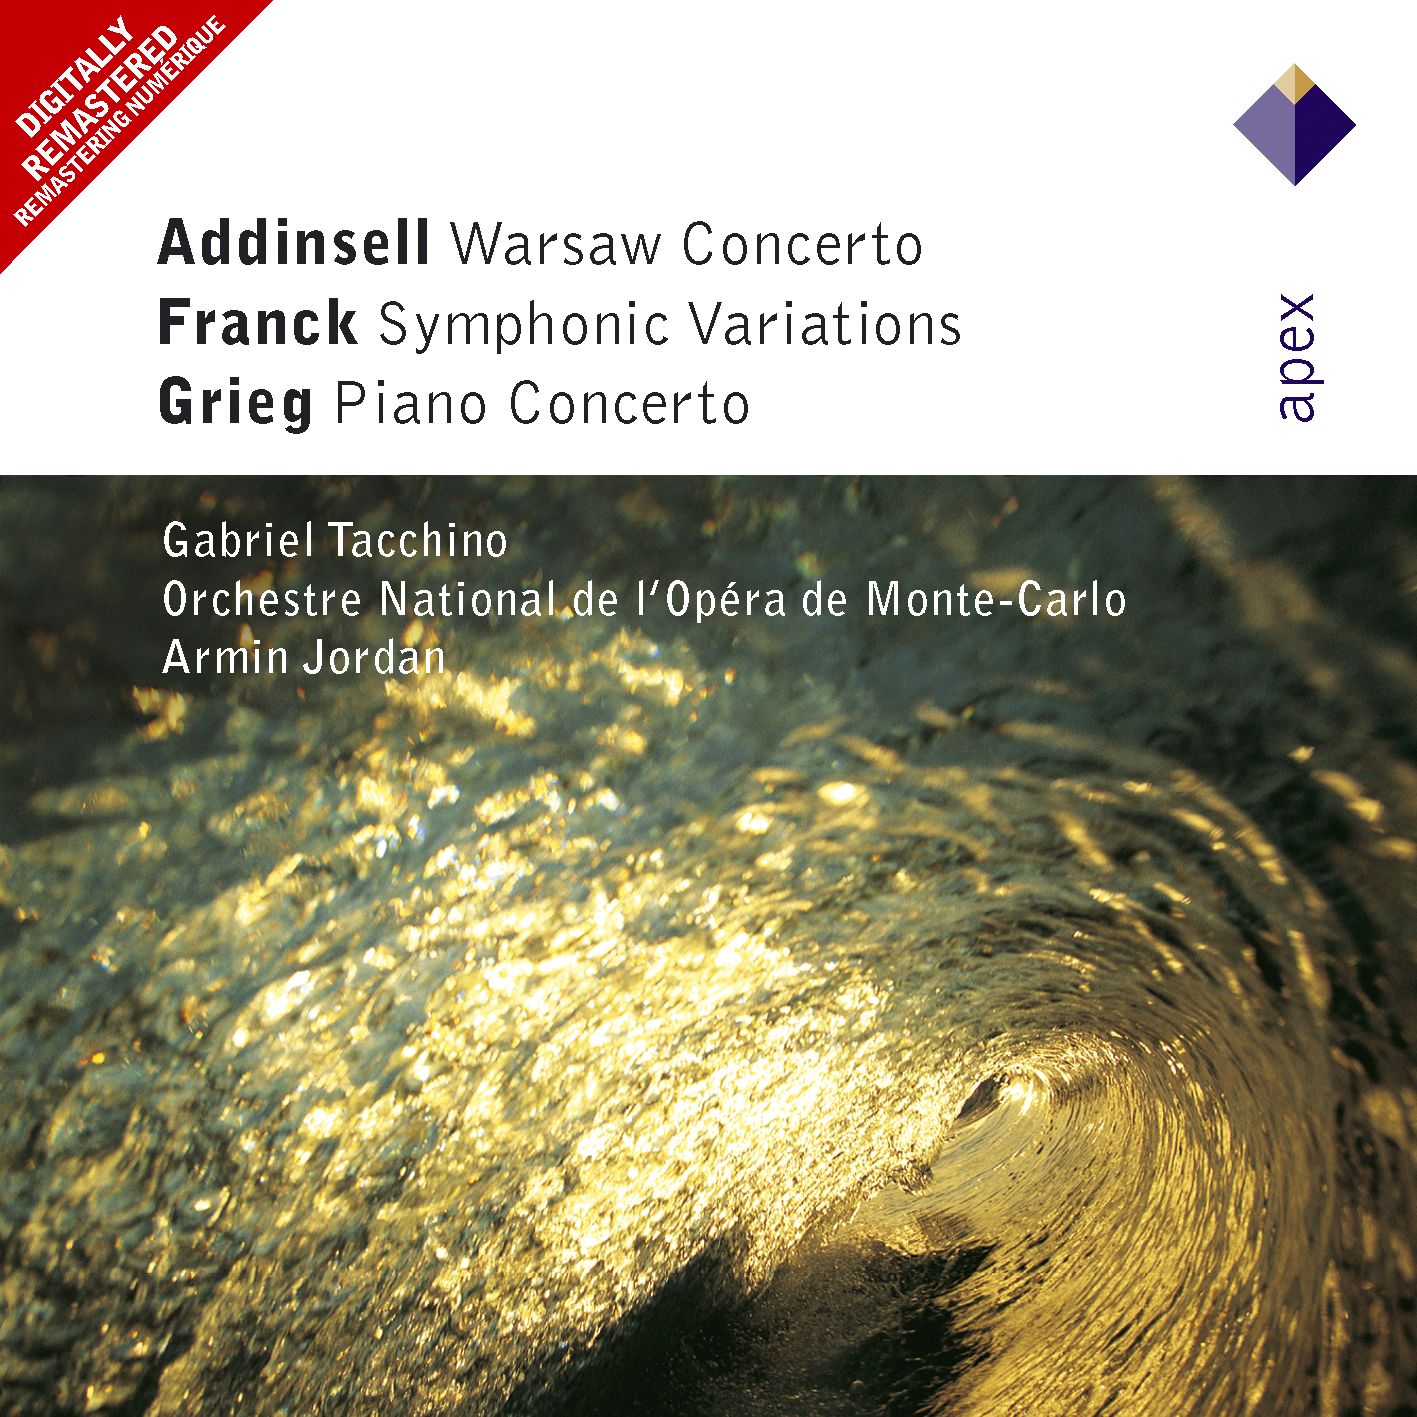 Addinsell, Franck & Grieg: Works for Piano & Orchestra | Warner Classics